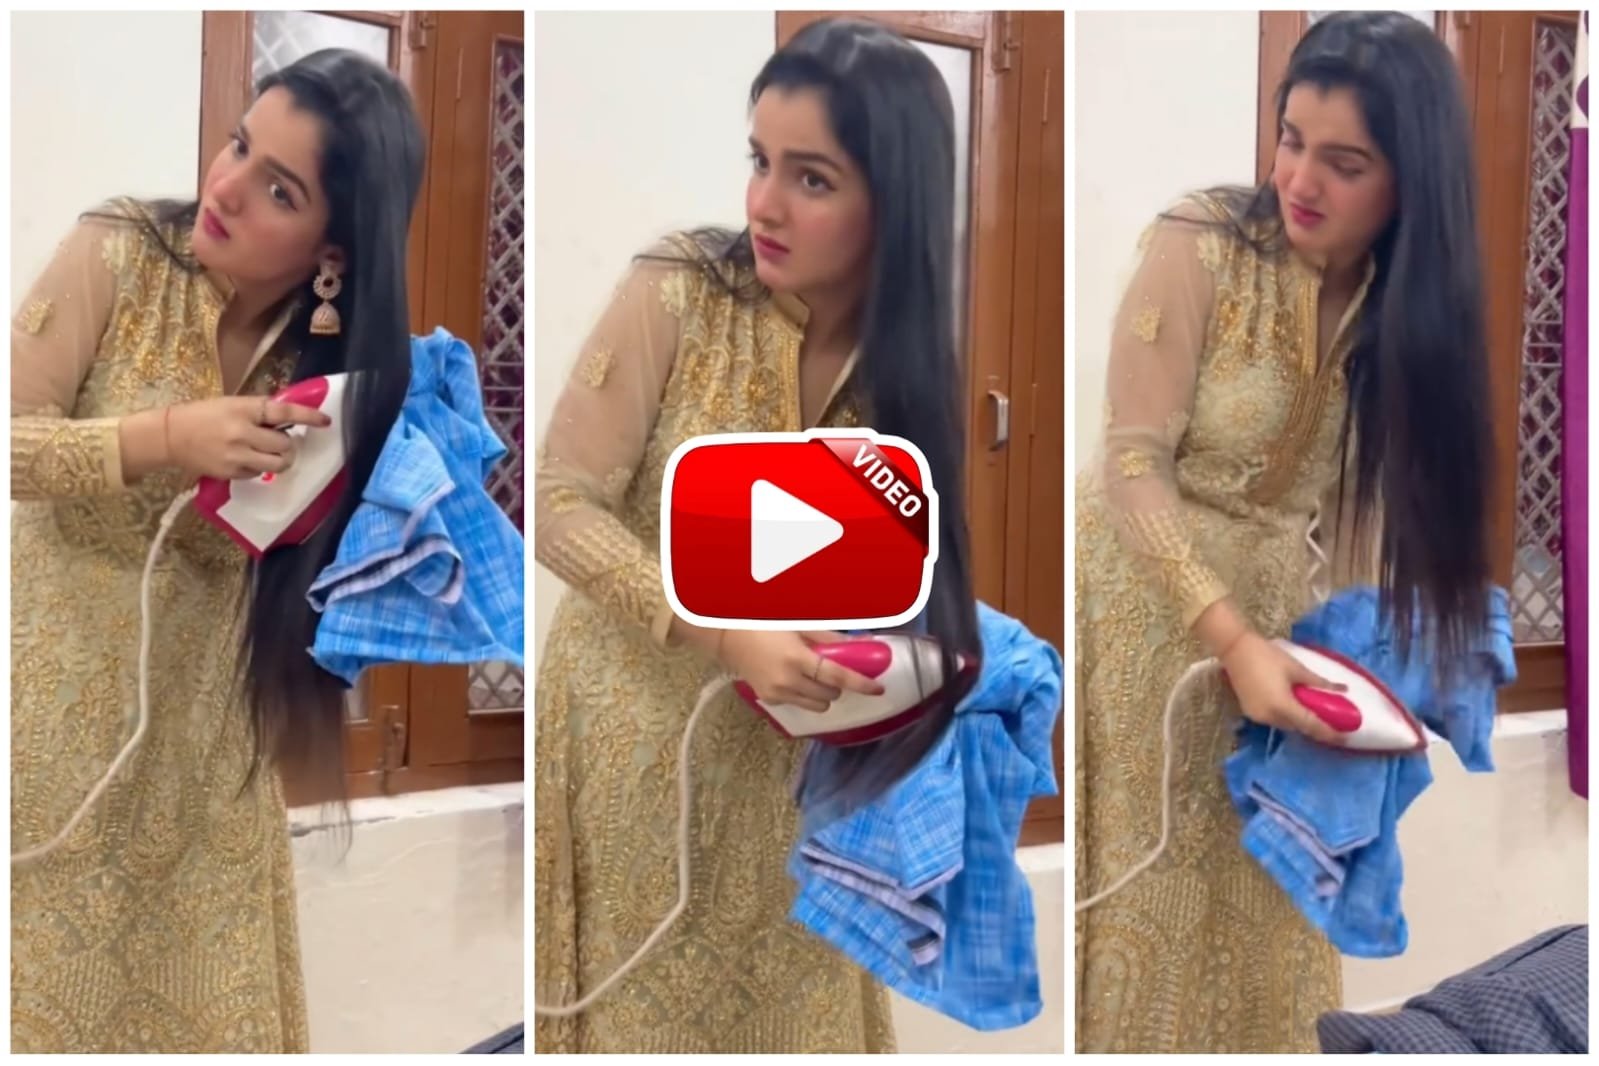 Desi Jugaad Ka Video | Girl straightened her hair with Jugaad without straightener